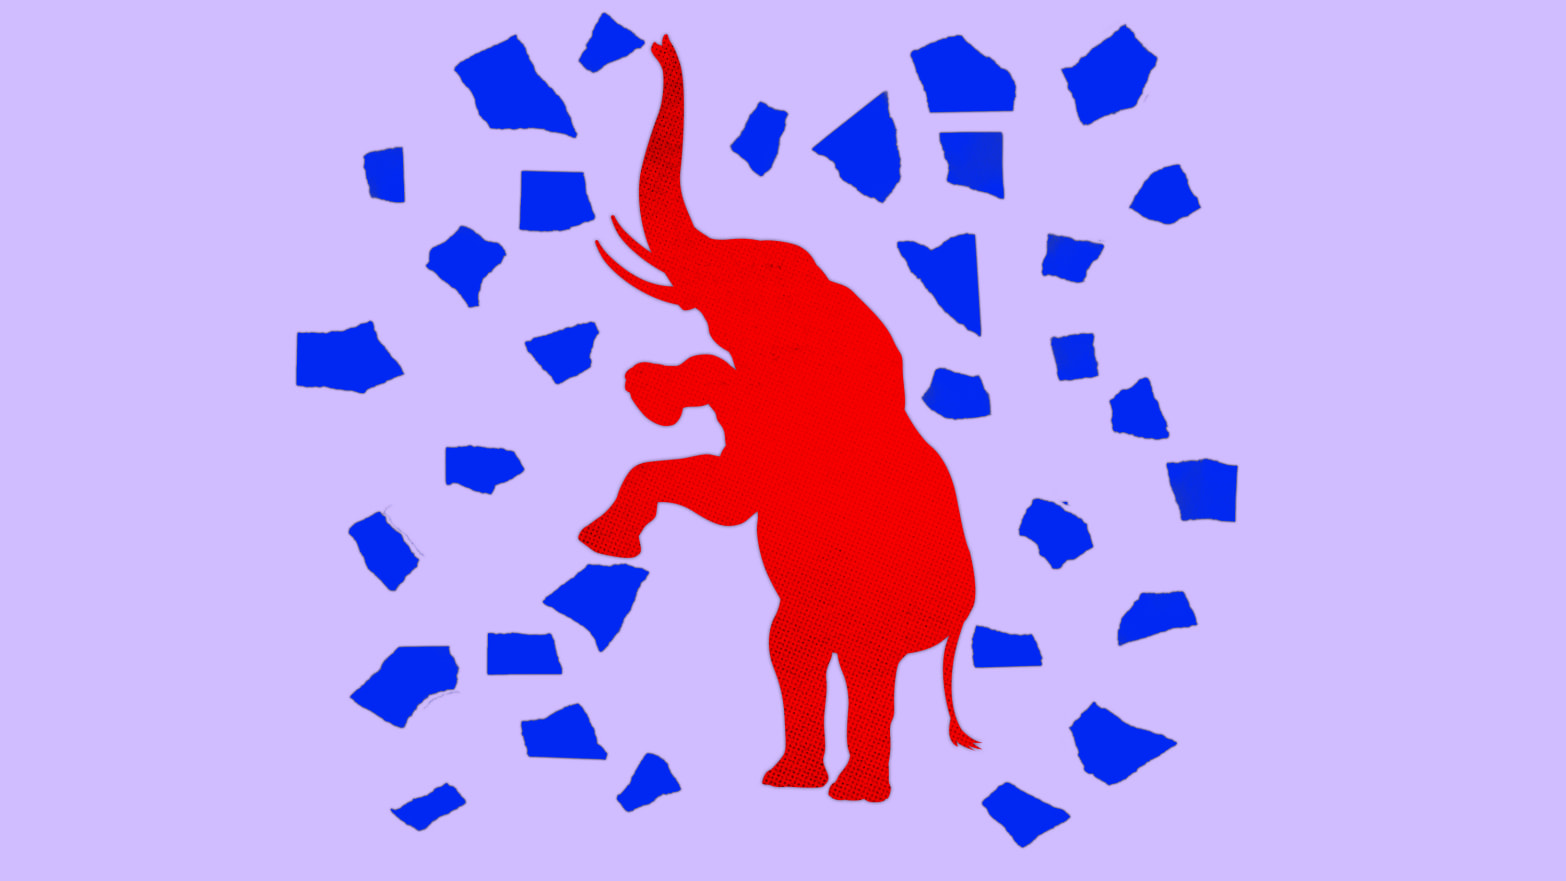 A photo illustration of a red elephant and torn pieces of blue paper.